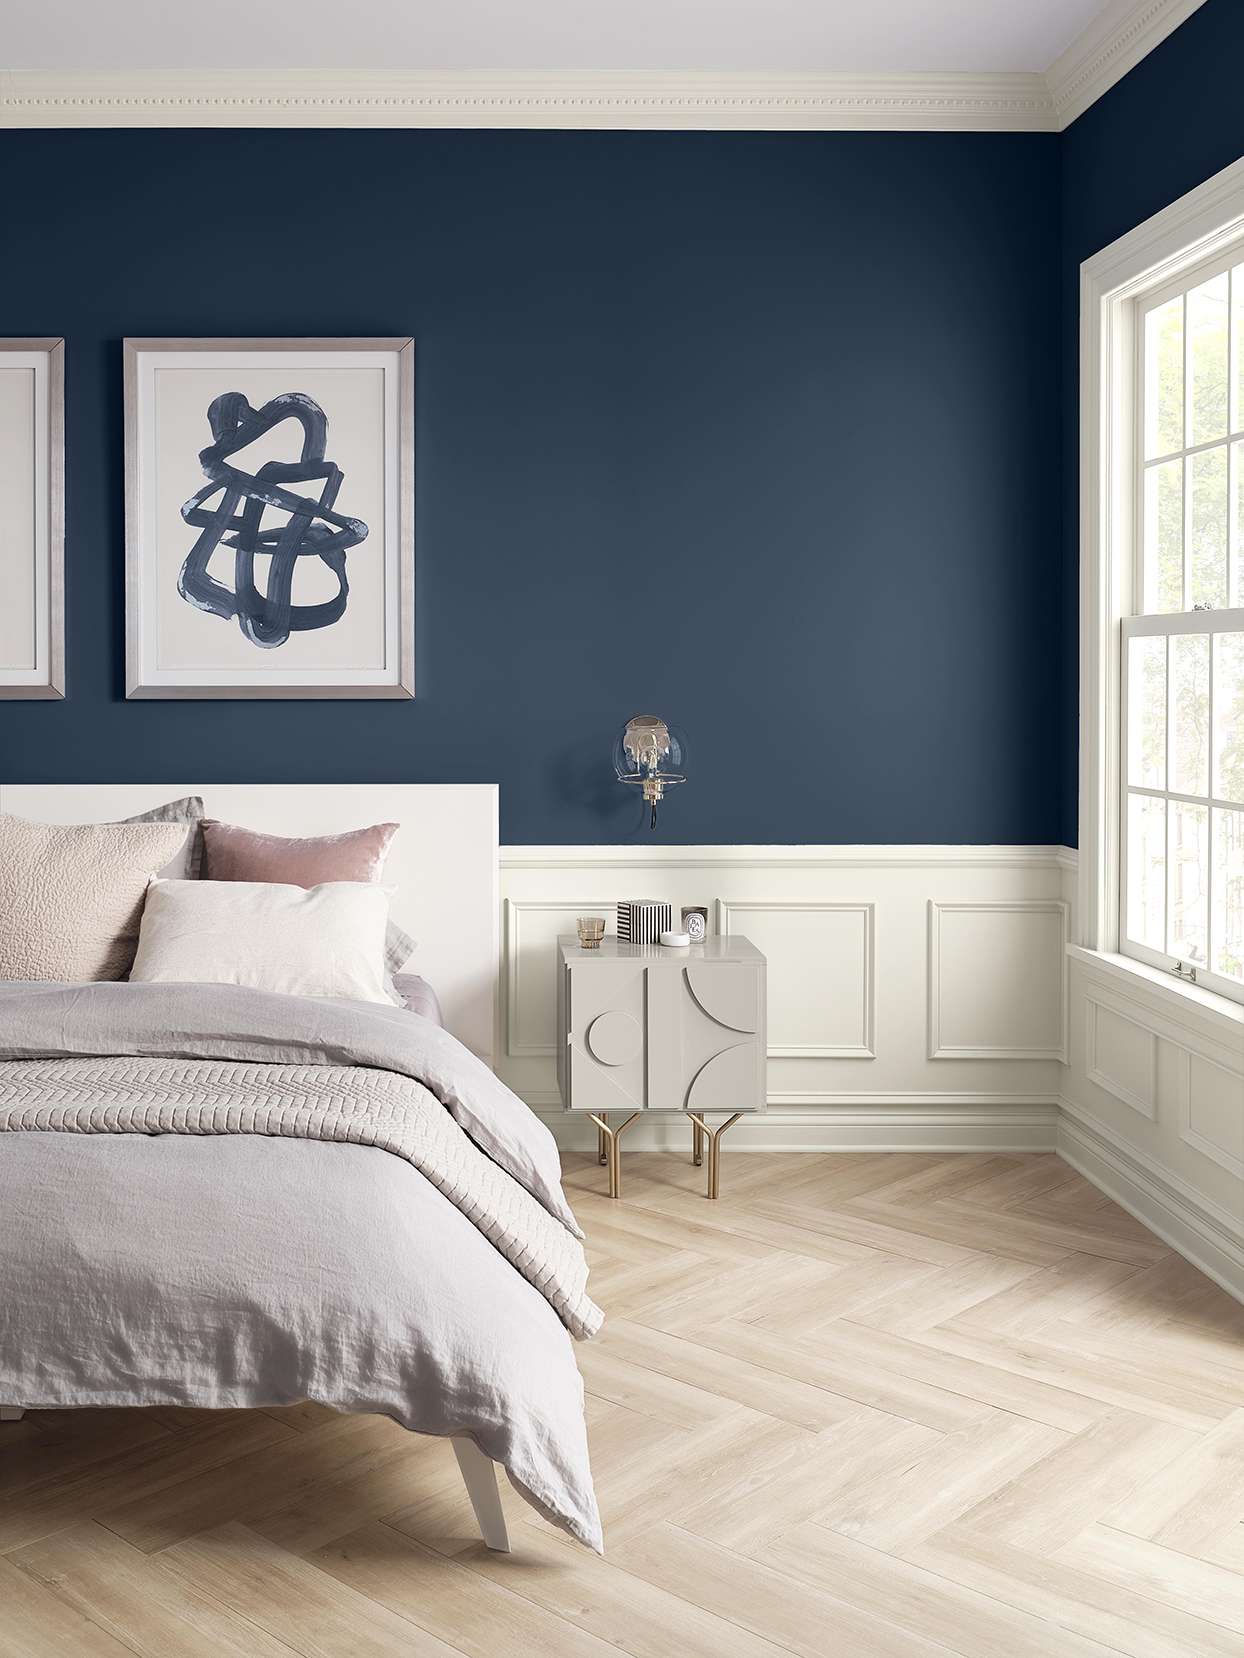 navy blue bedroom walls with white wainscoting